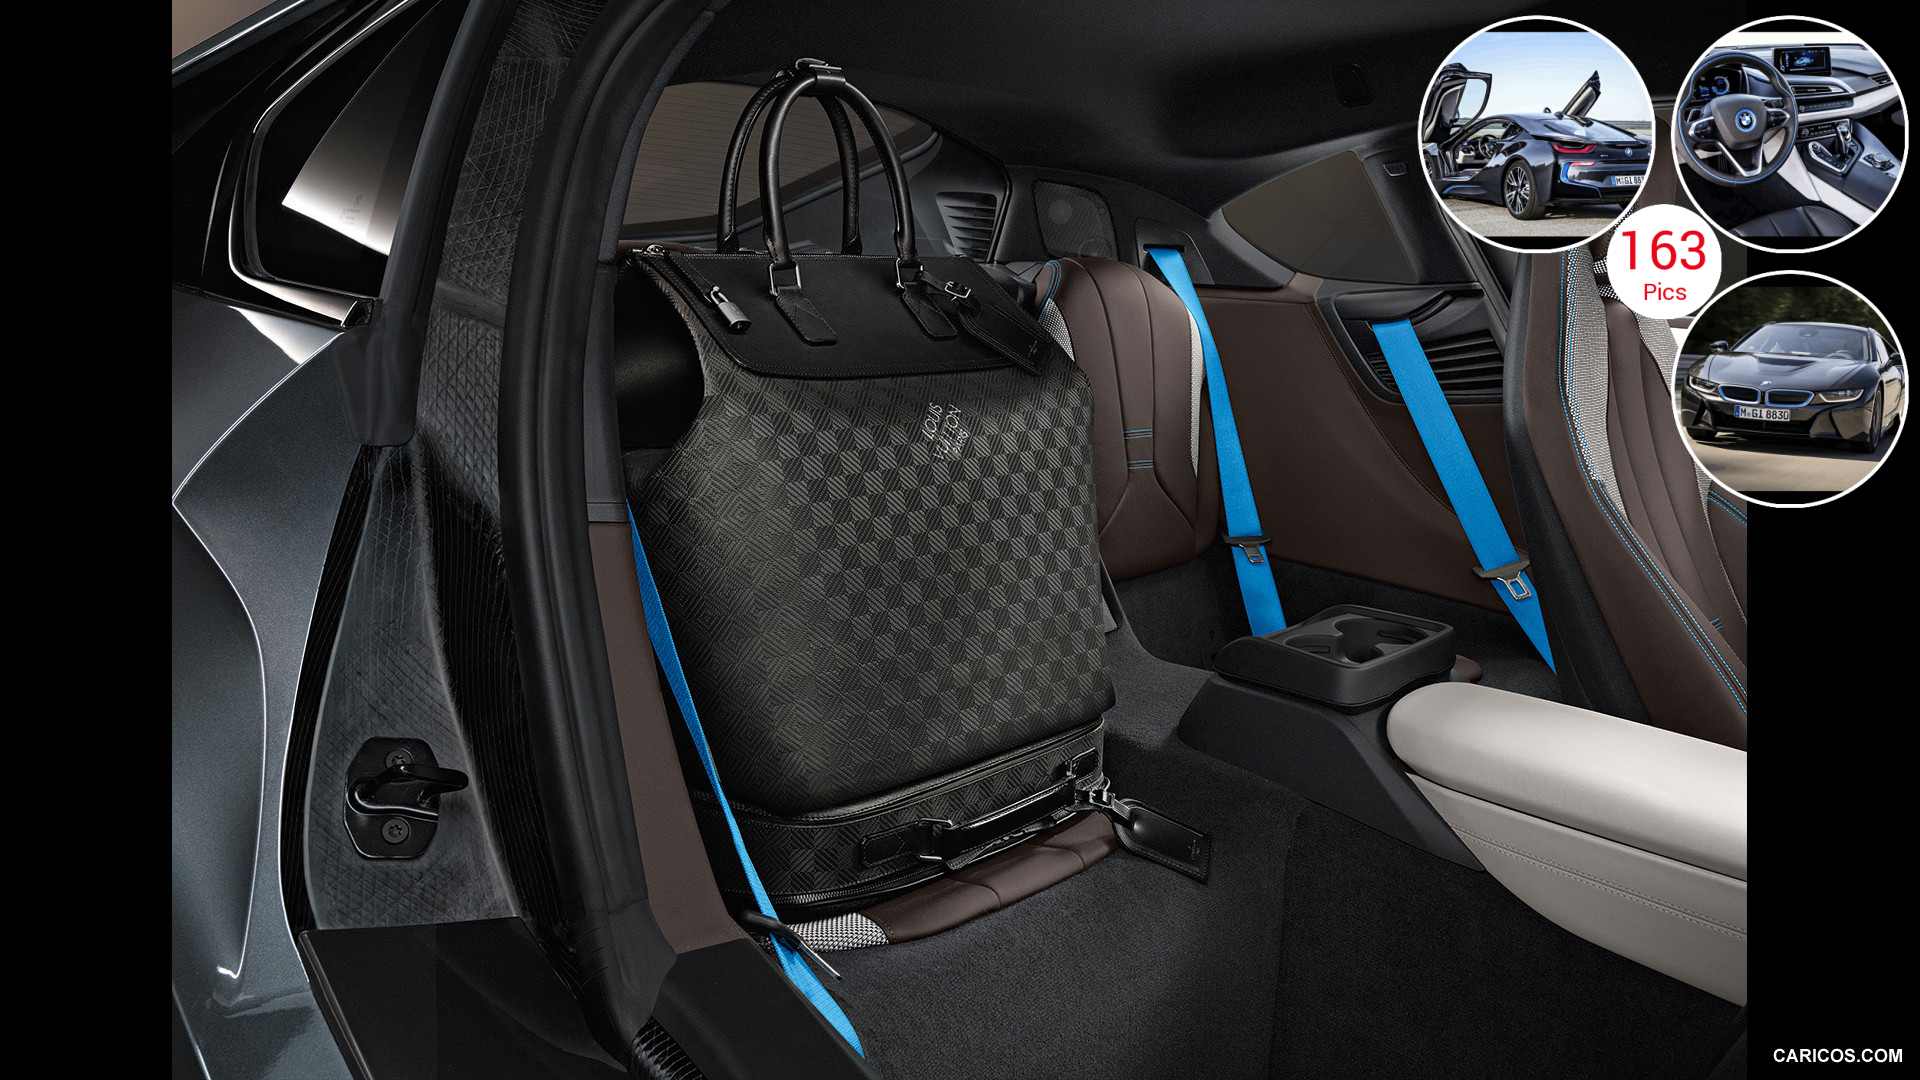 2015 BMW i8 Coupe - Louis Vuitton Luggage HD Wallpaper